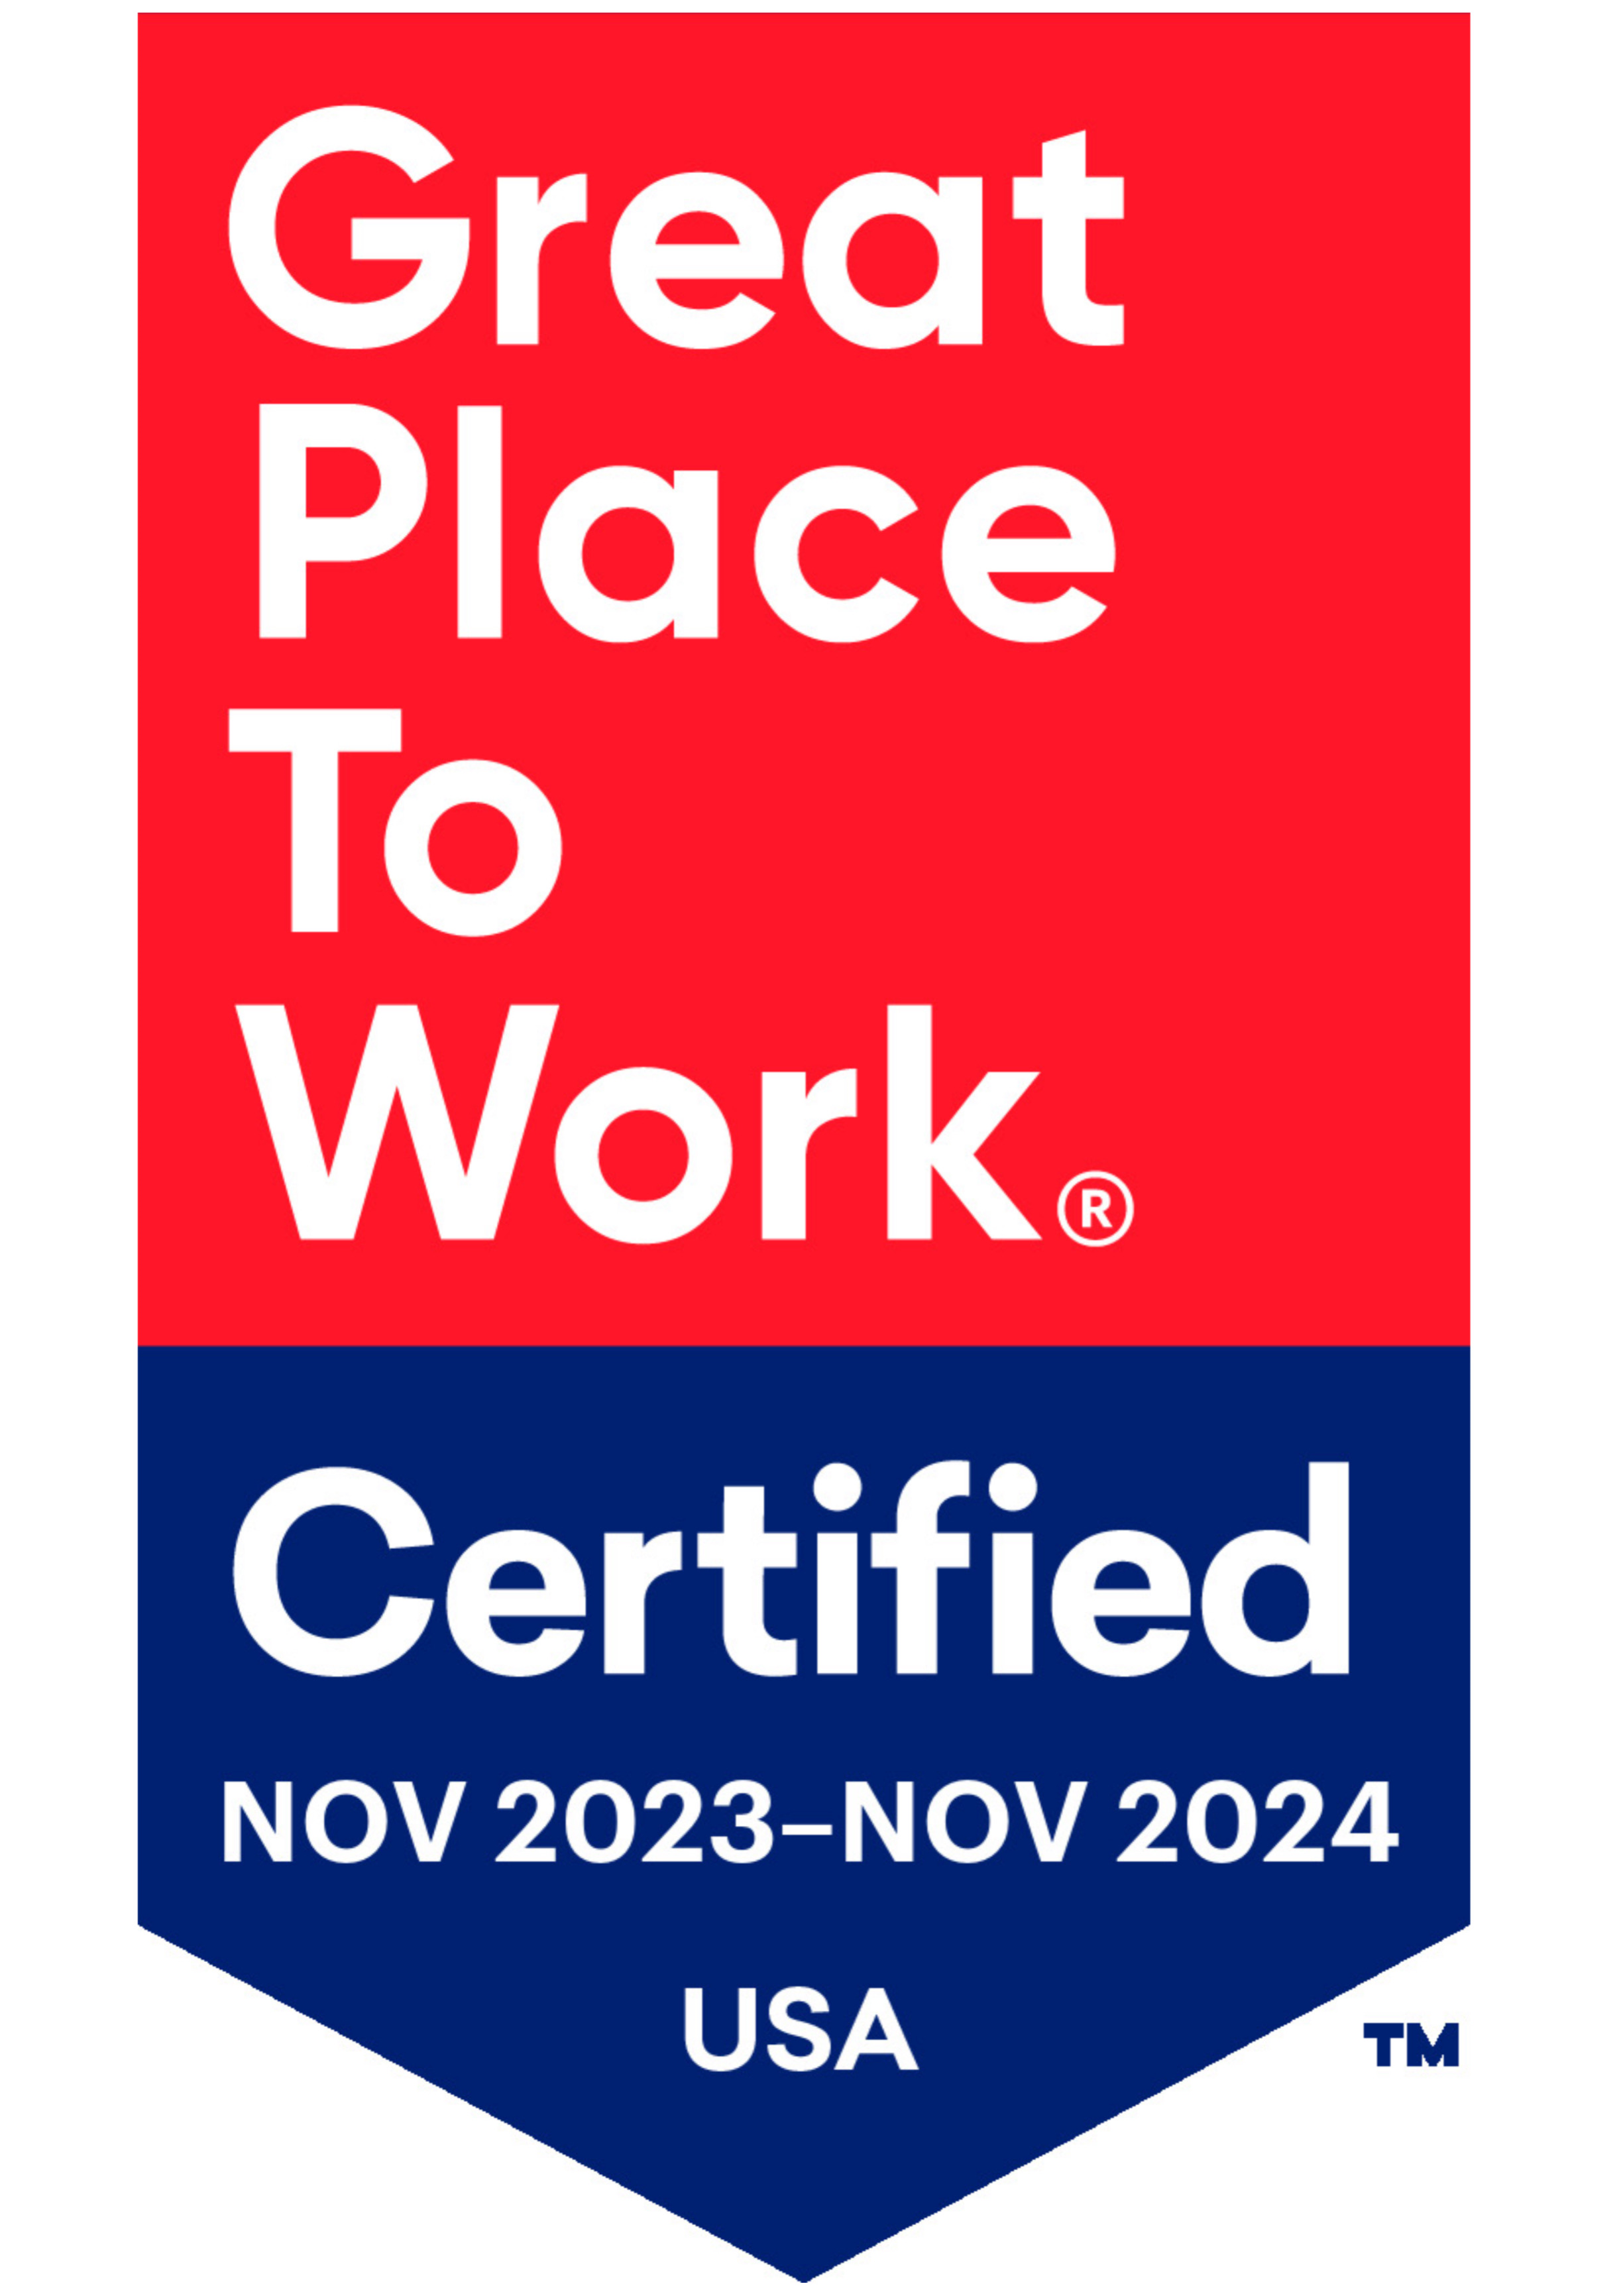 Rady has earned the honor of Great Place to Work Certification